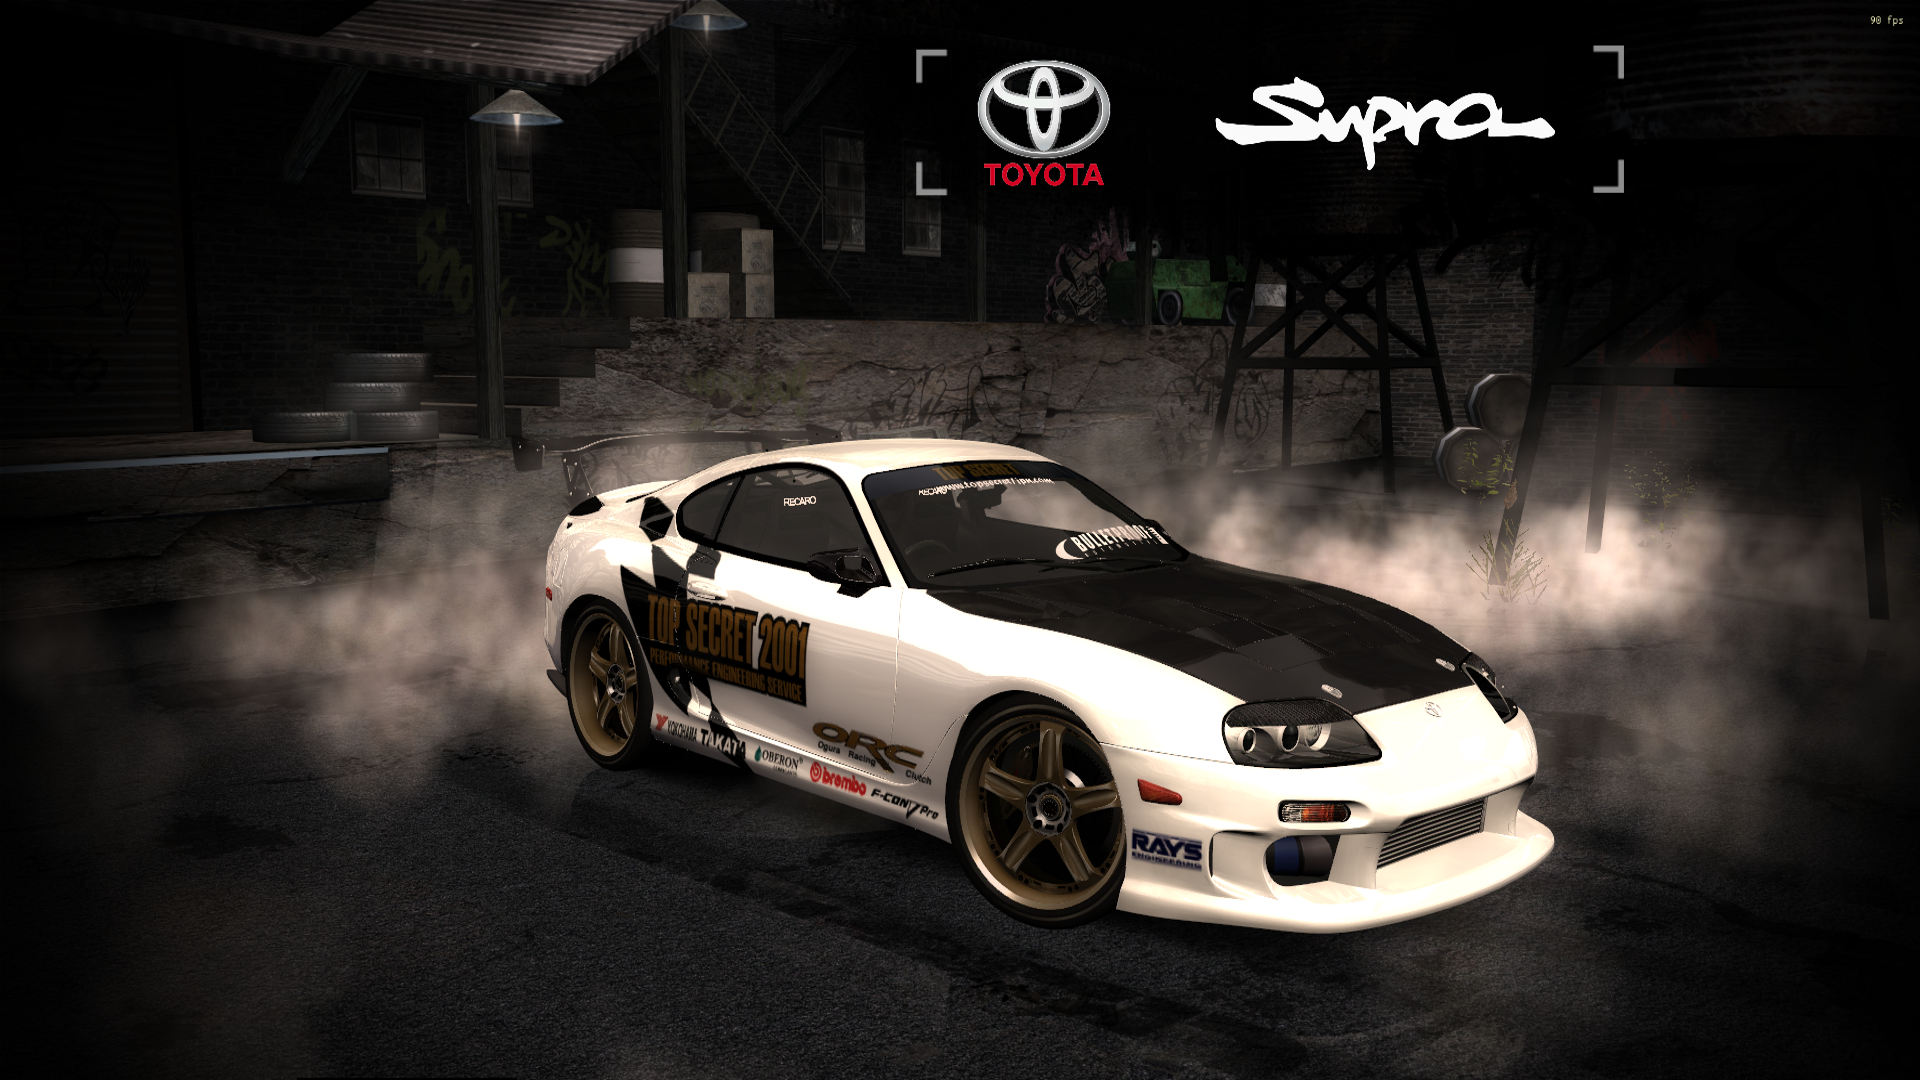 Need For Speed Most Wanted 1998 Top Secret Toyota Supra RZ Mk.IV 0-300